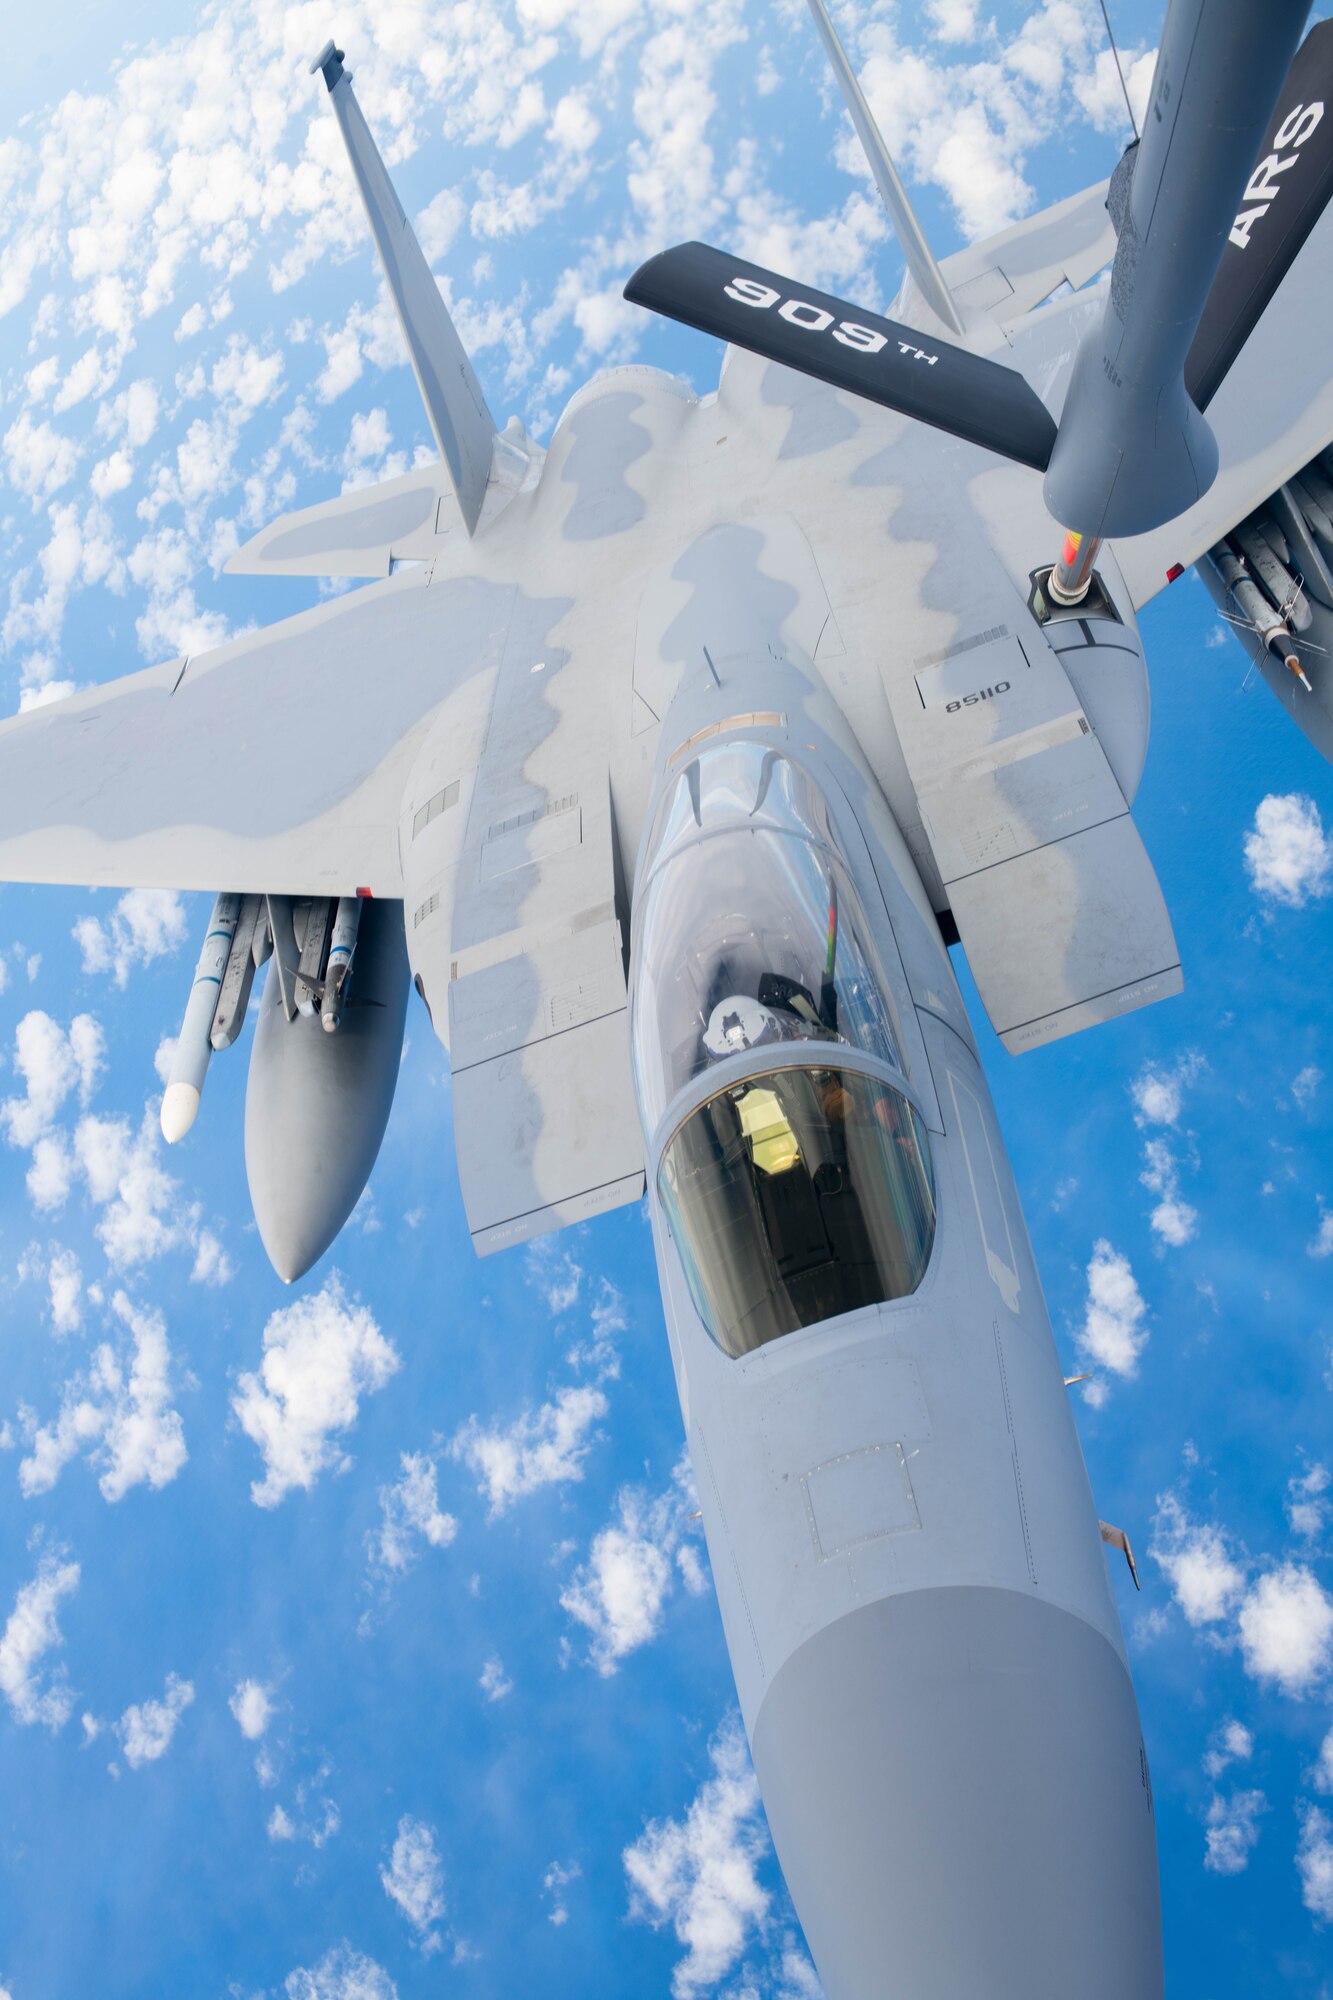 A jet receives aerial refueling.